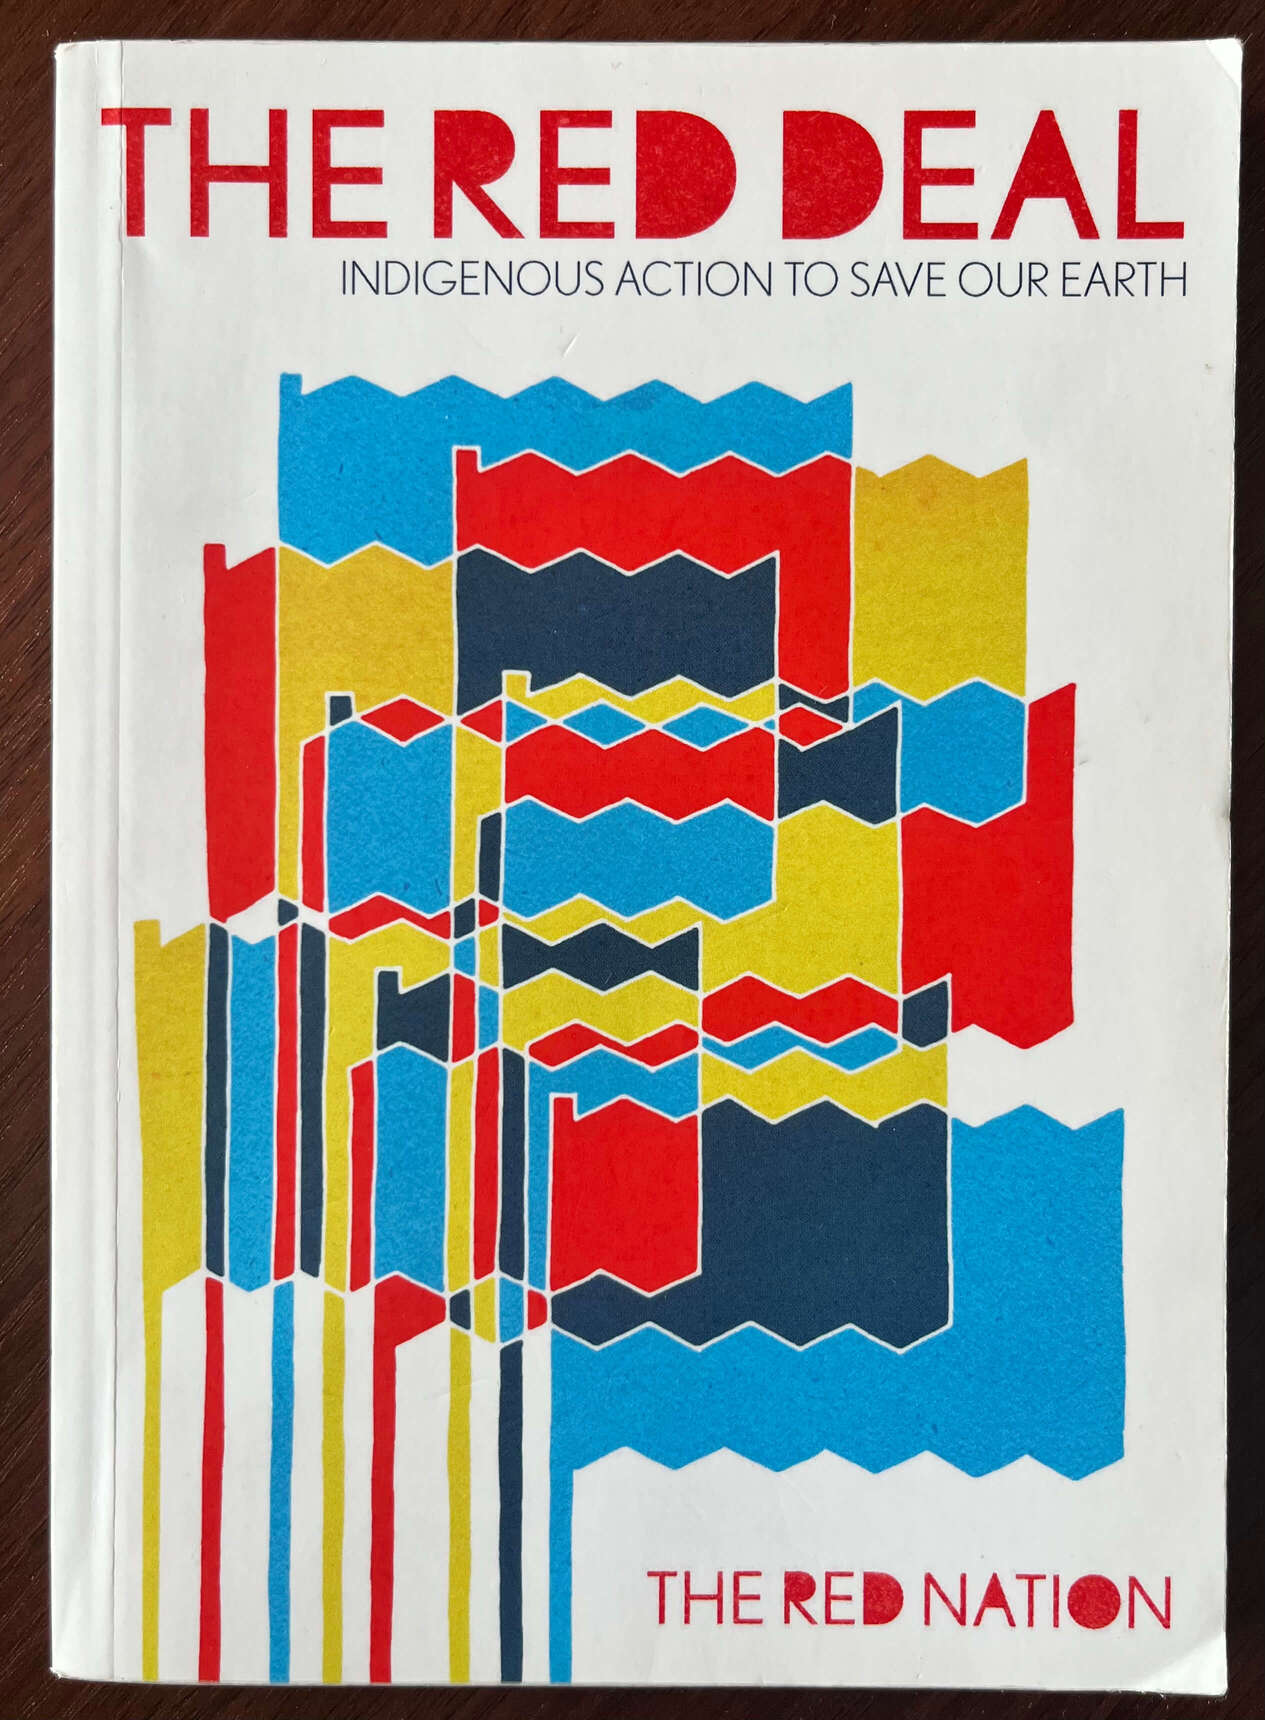 “The Red Deal: Indigenous Action to Save our Earth” by The Red Nation.